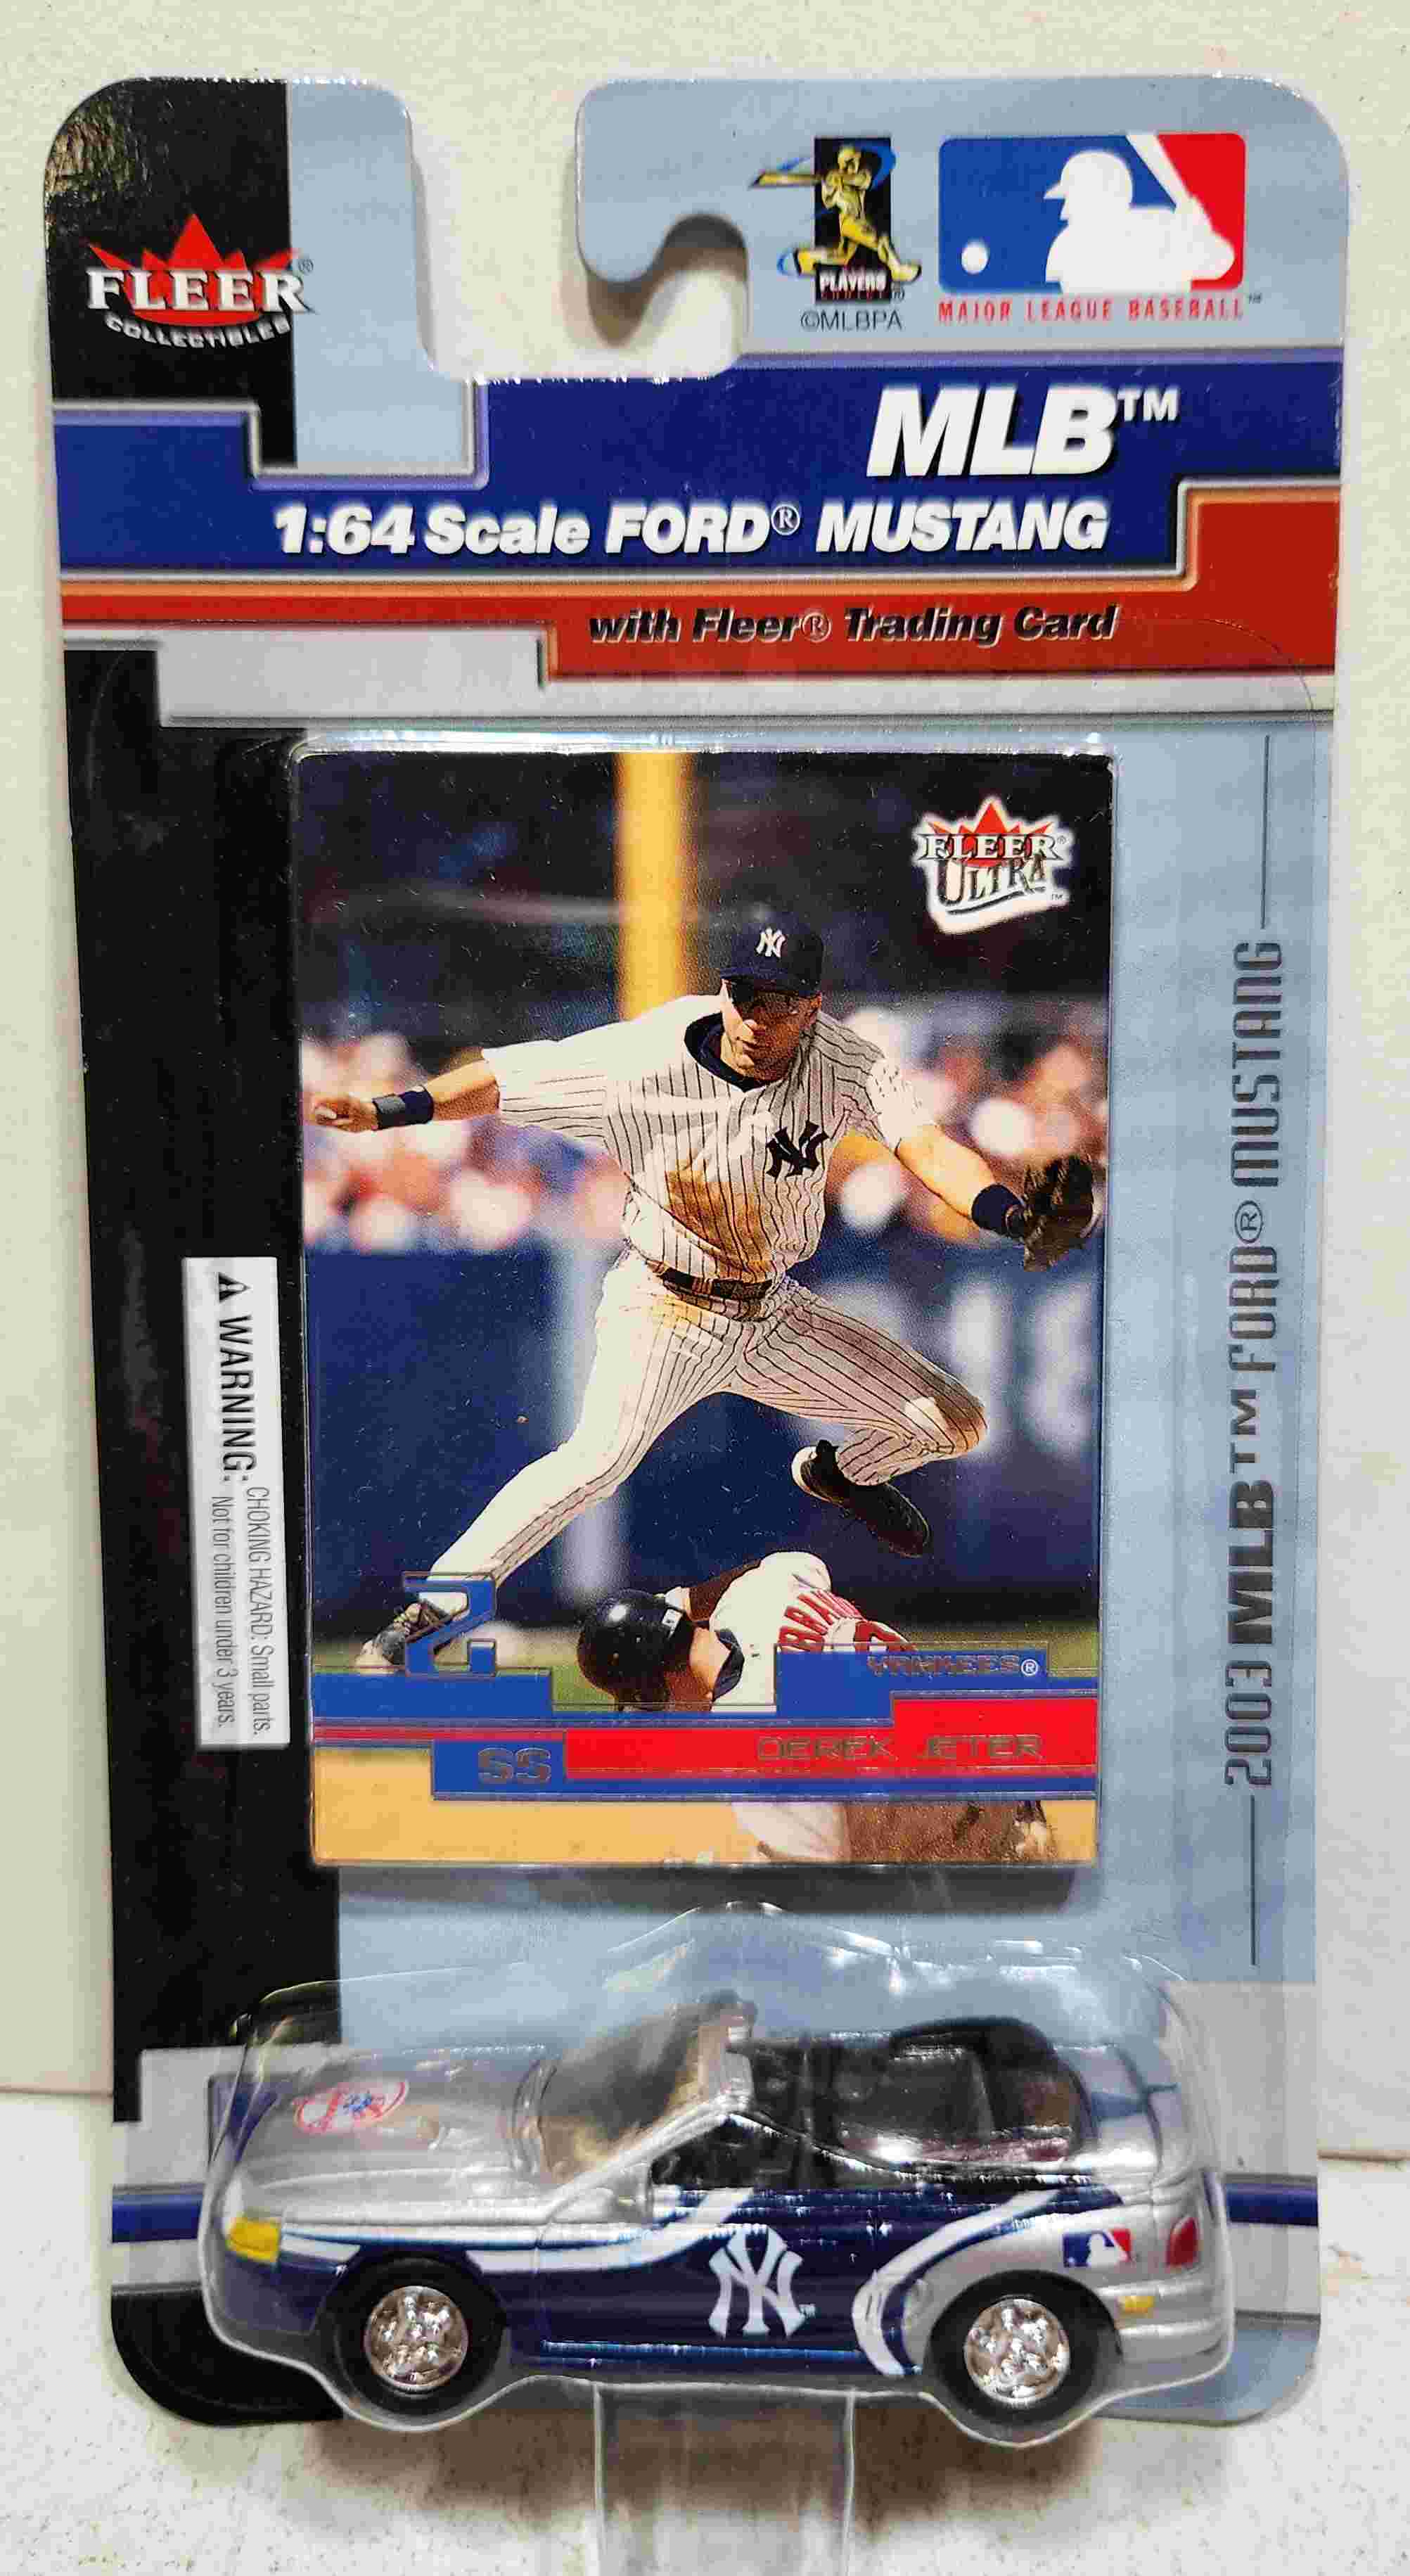 2003 NY Yankees 1/64th Mustang with Derek Jeter trading card